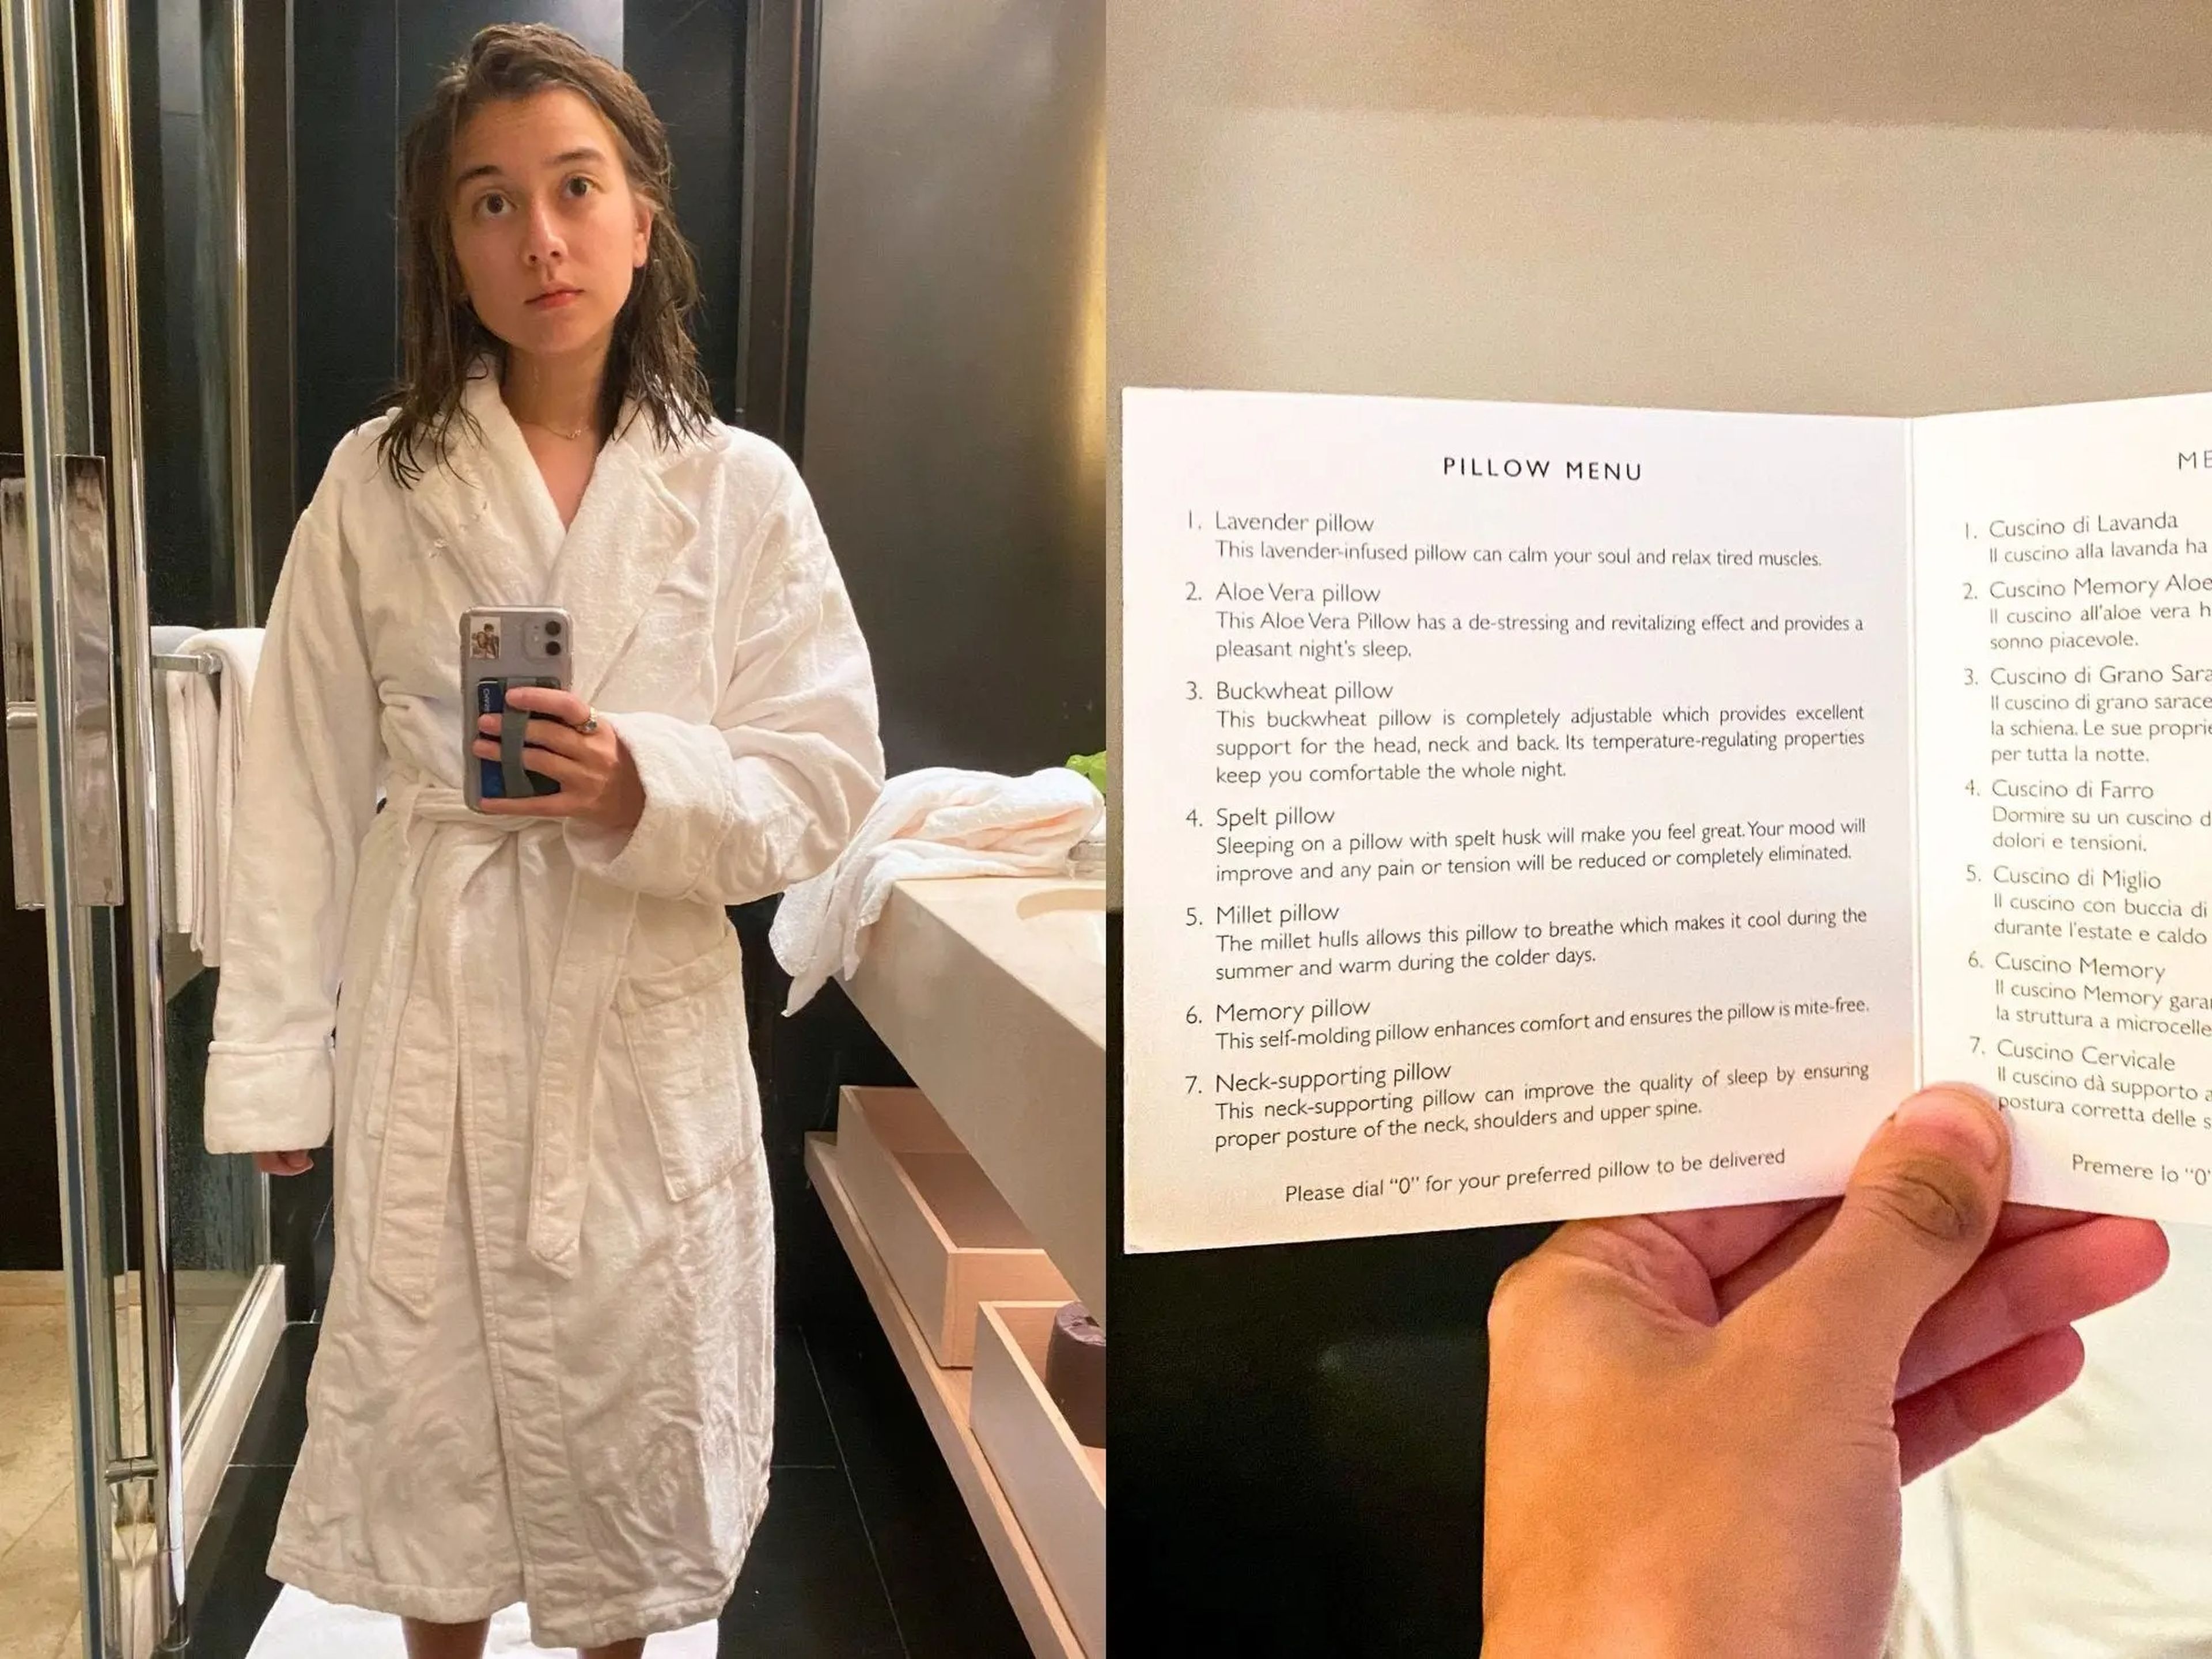 Left: The author in a bathroom in a white robe takes a full-length selfie in front of the mirror. Right: The author's hand holds a pillow menu on a white card.